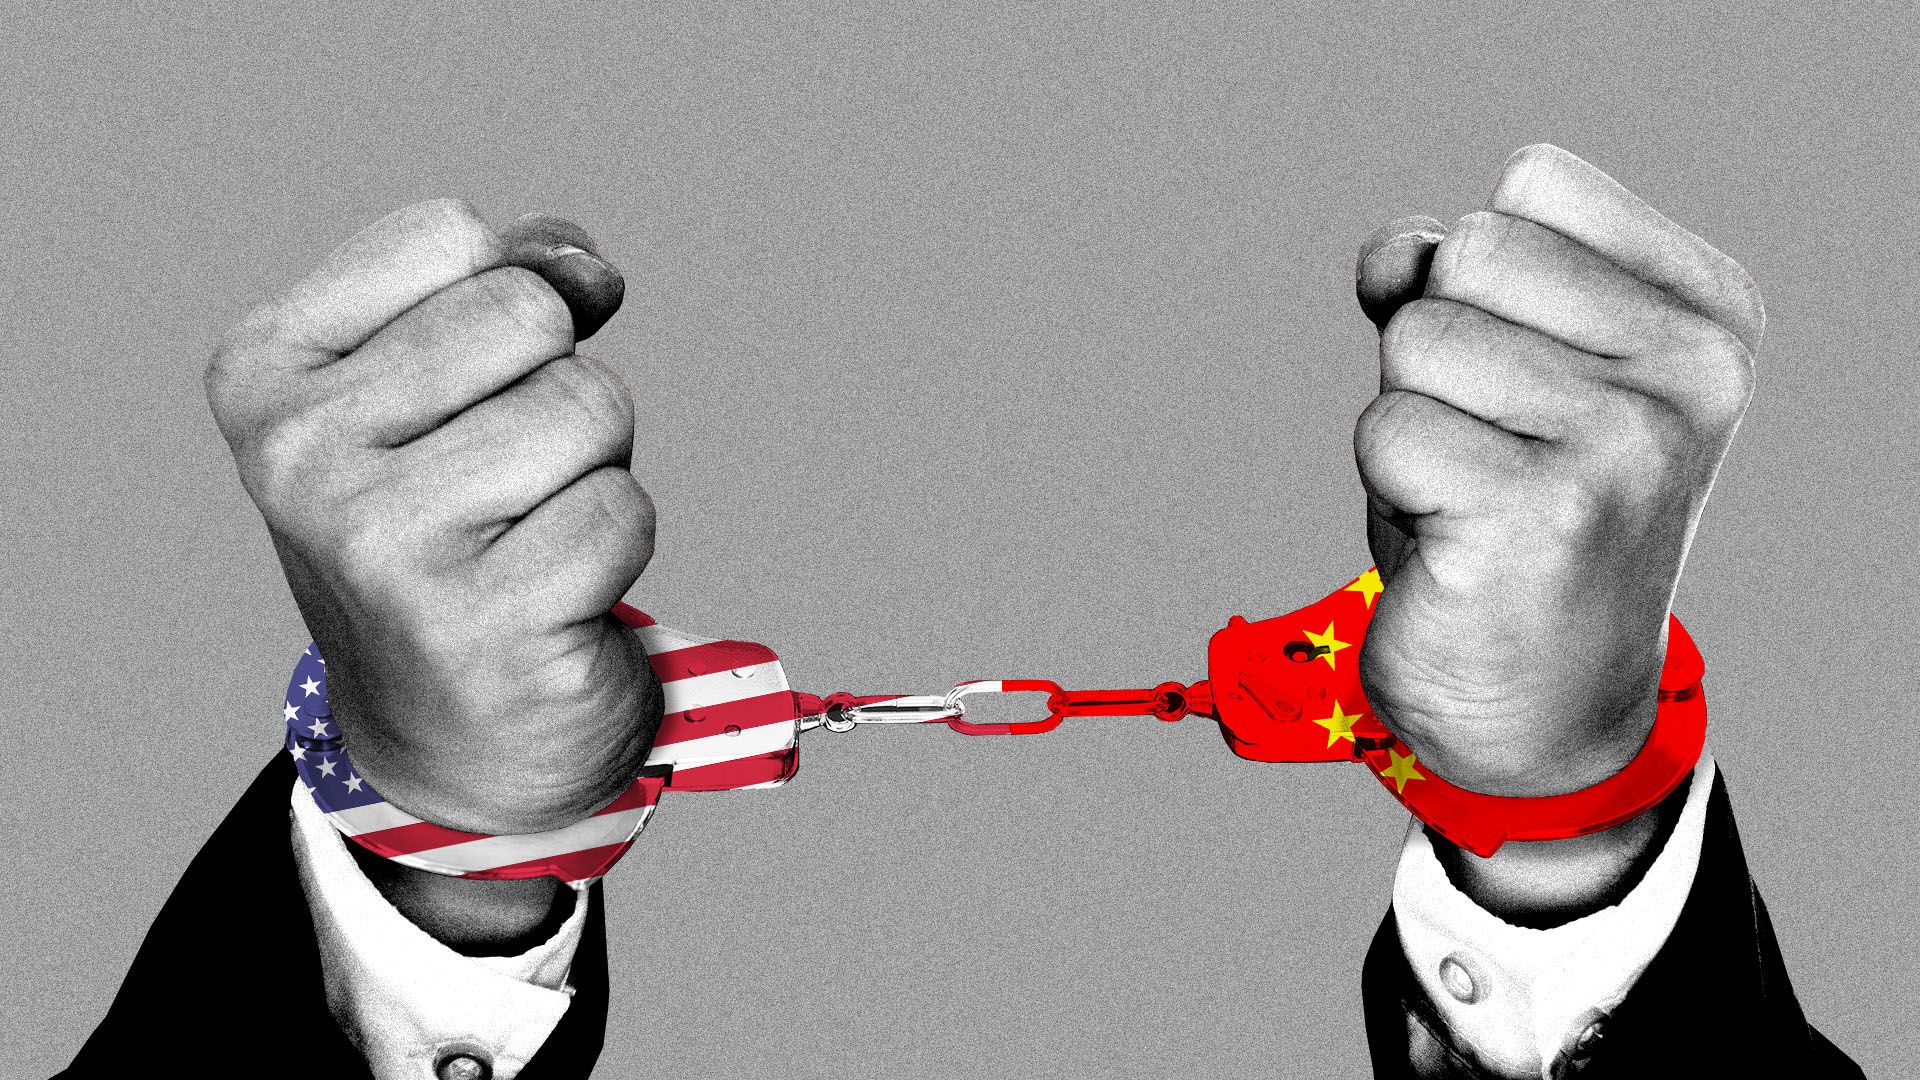 Illustration of man in handcuffs with U.S. and Chinese flags